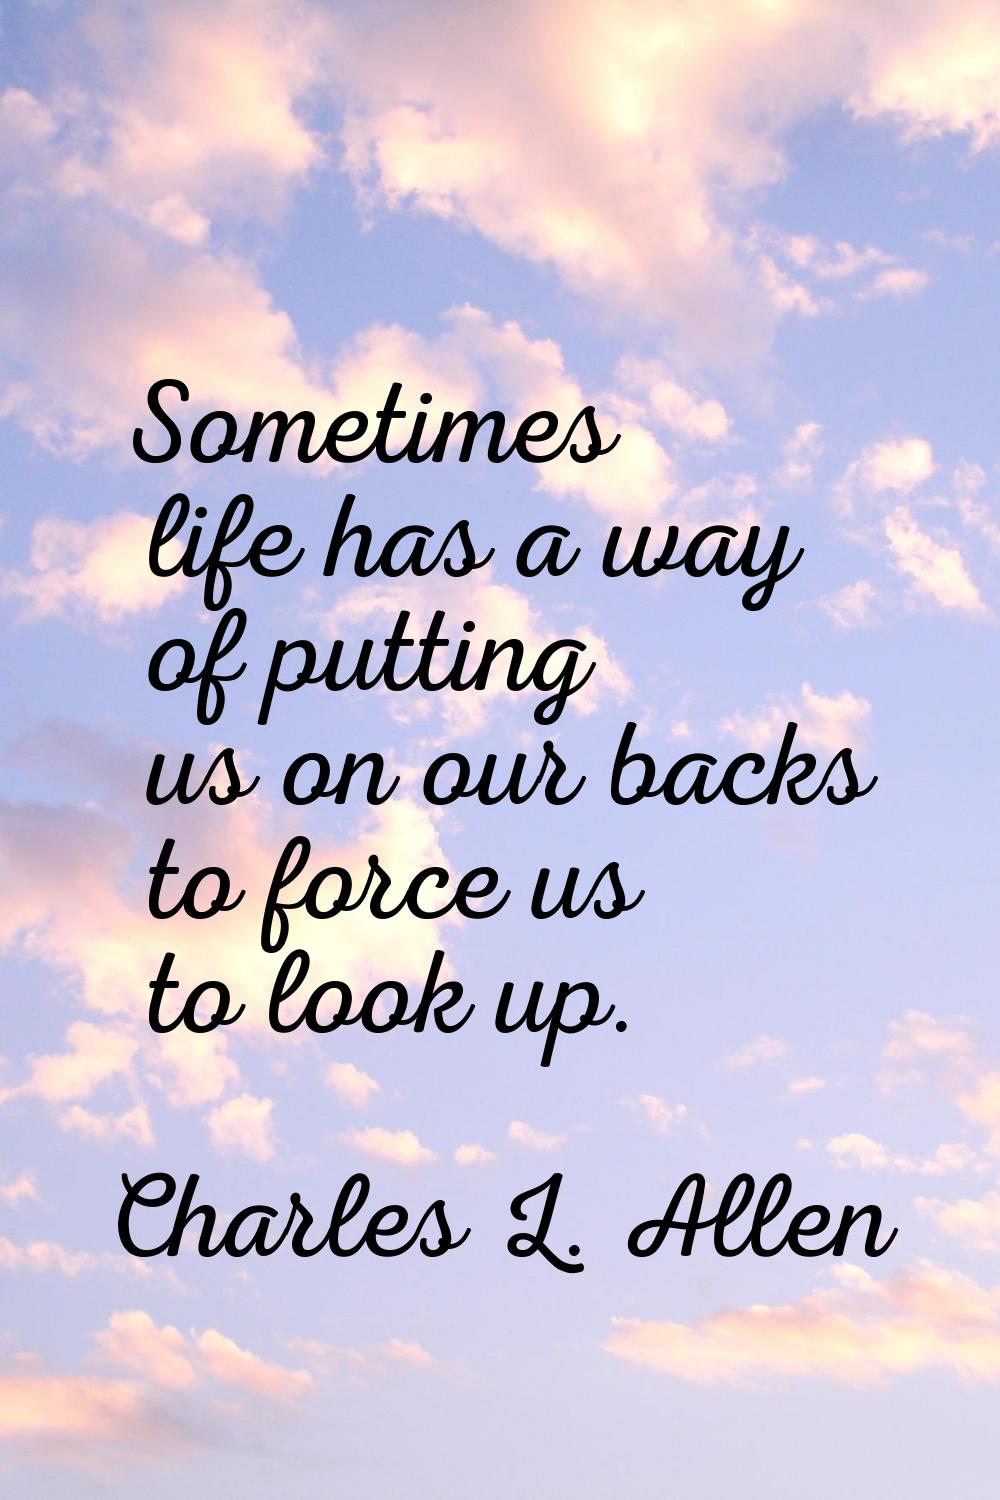 Sometimes life has a way of putting us on our backs to force us to look up.